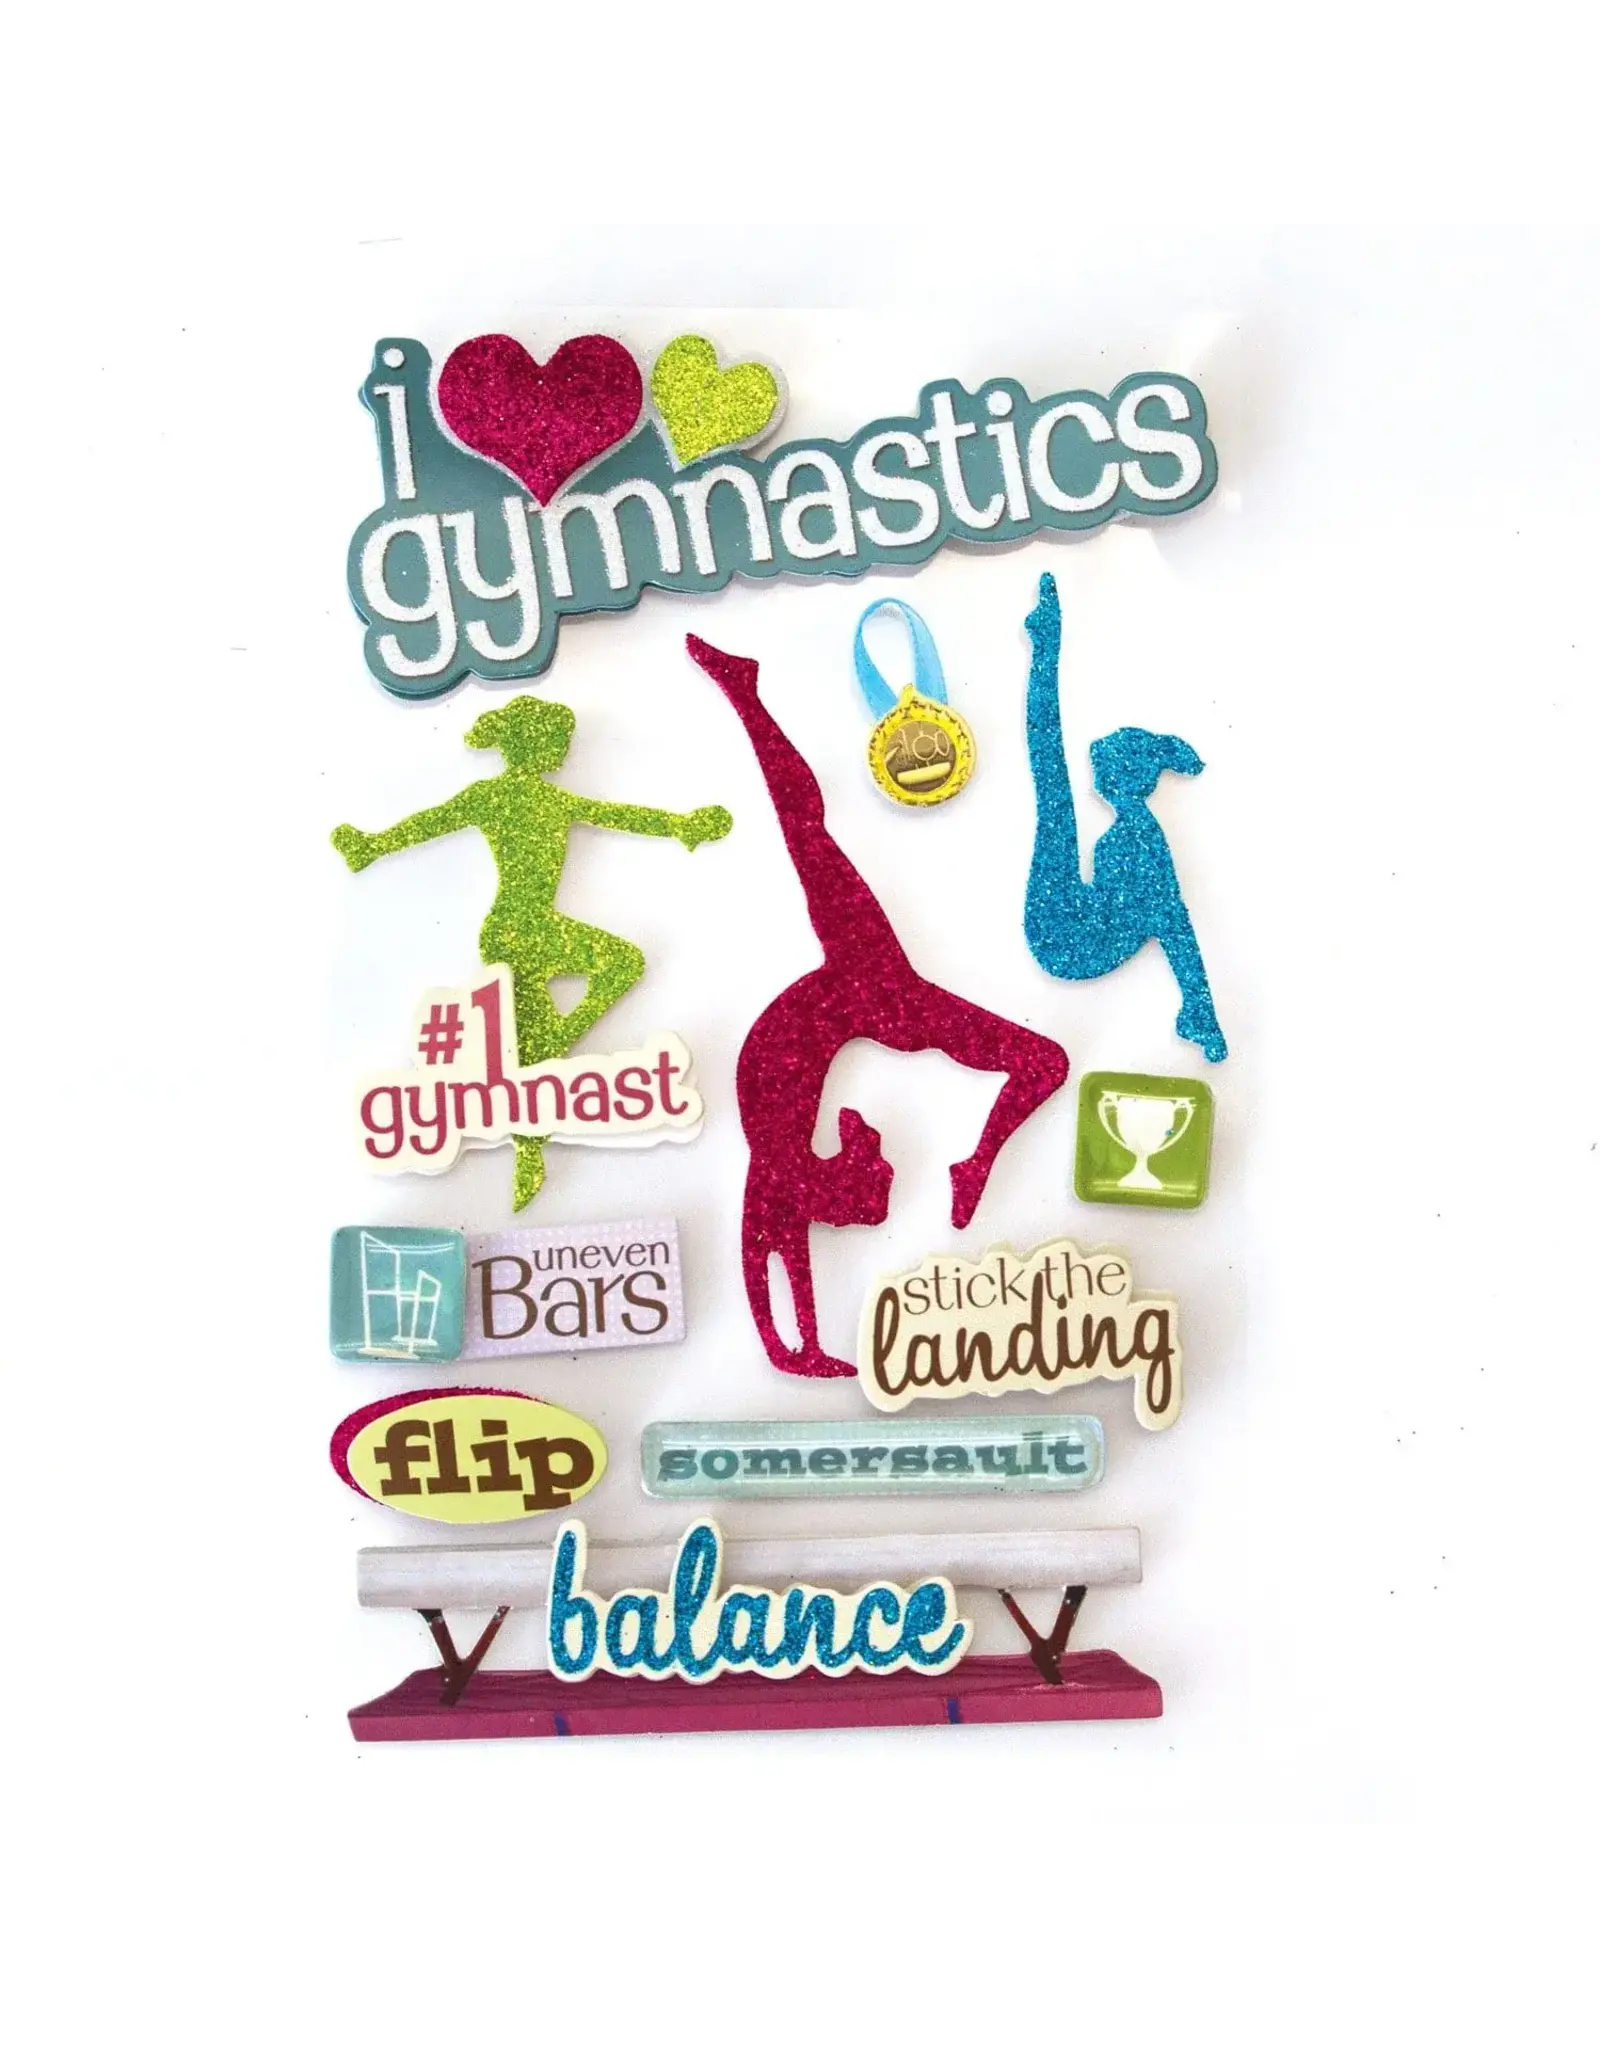 PAPER HOUSE PRODUCTIONS PAPER HOUSE GYMNASTICS 3D STICKERS